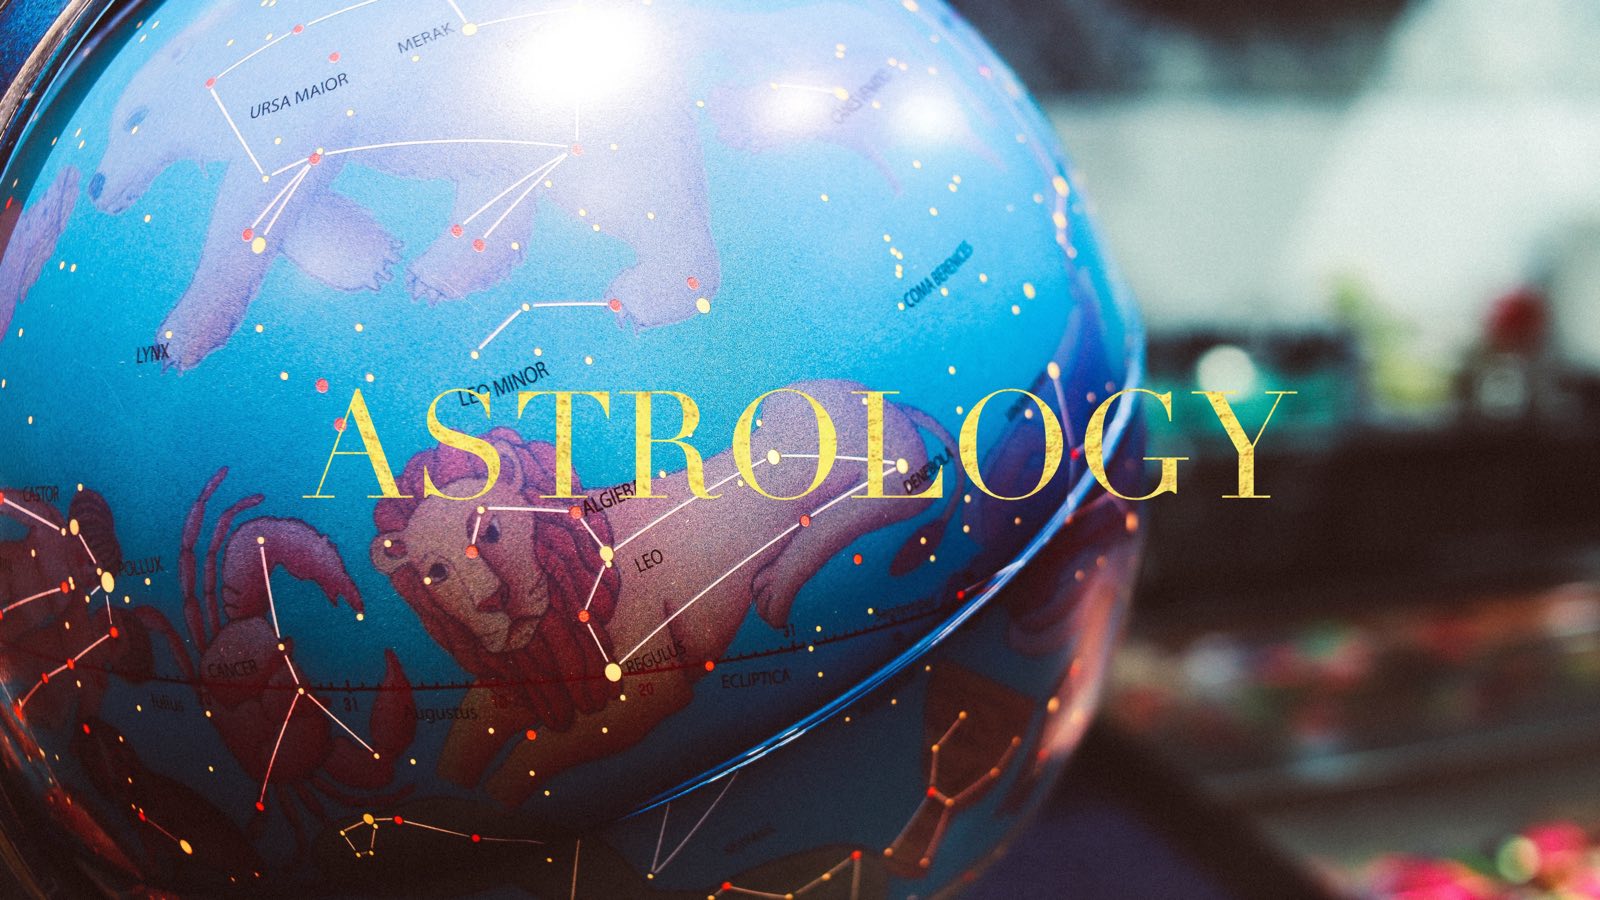 Bright blue globe with a blurred background with the Leo and Leo Minor constellations on the front with the word "astrology" in all caps in gold on the foreground.